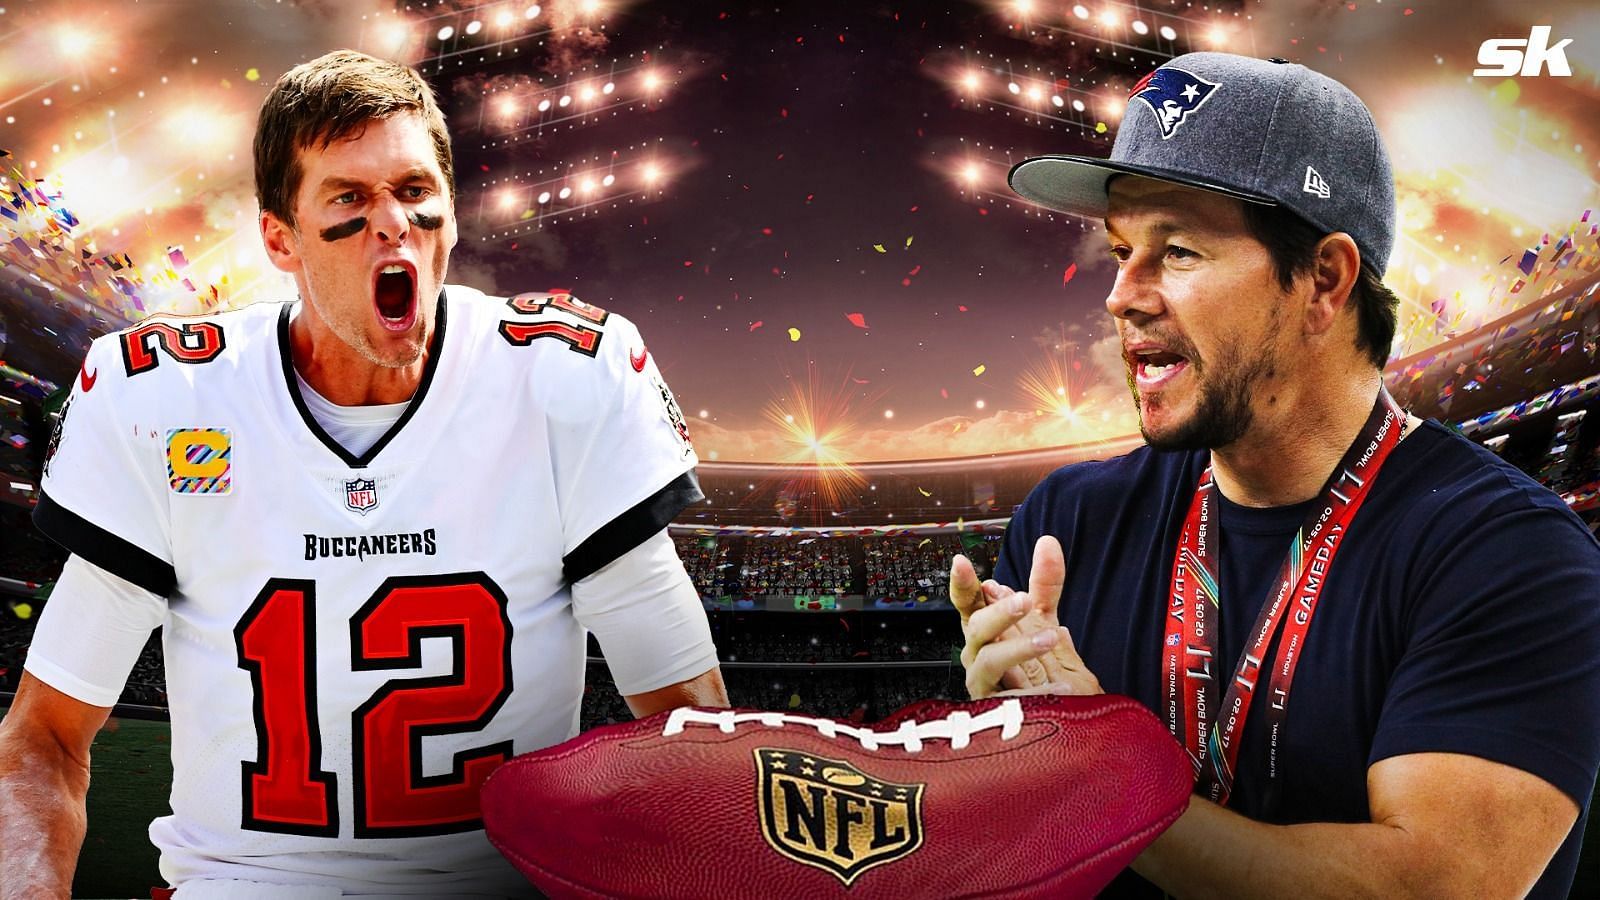 Mark Wahlberg gives Tom Brady words of encouragement in hilarious fashion